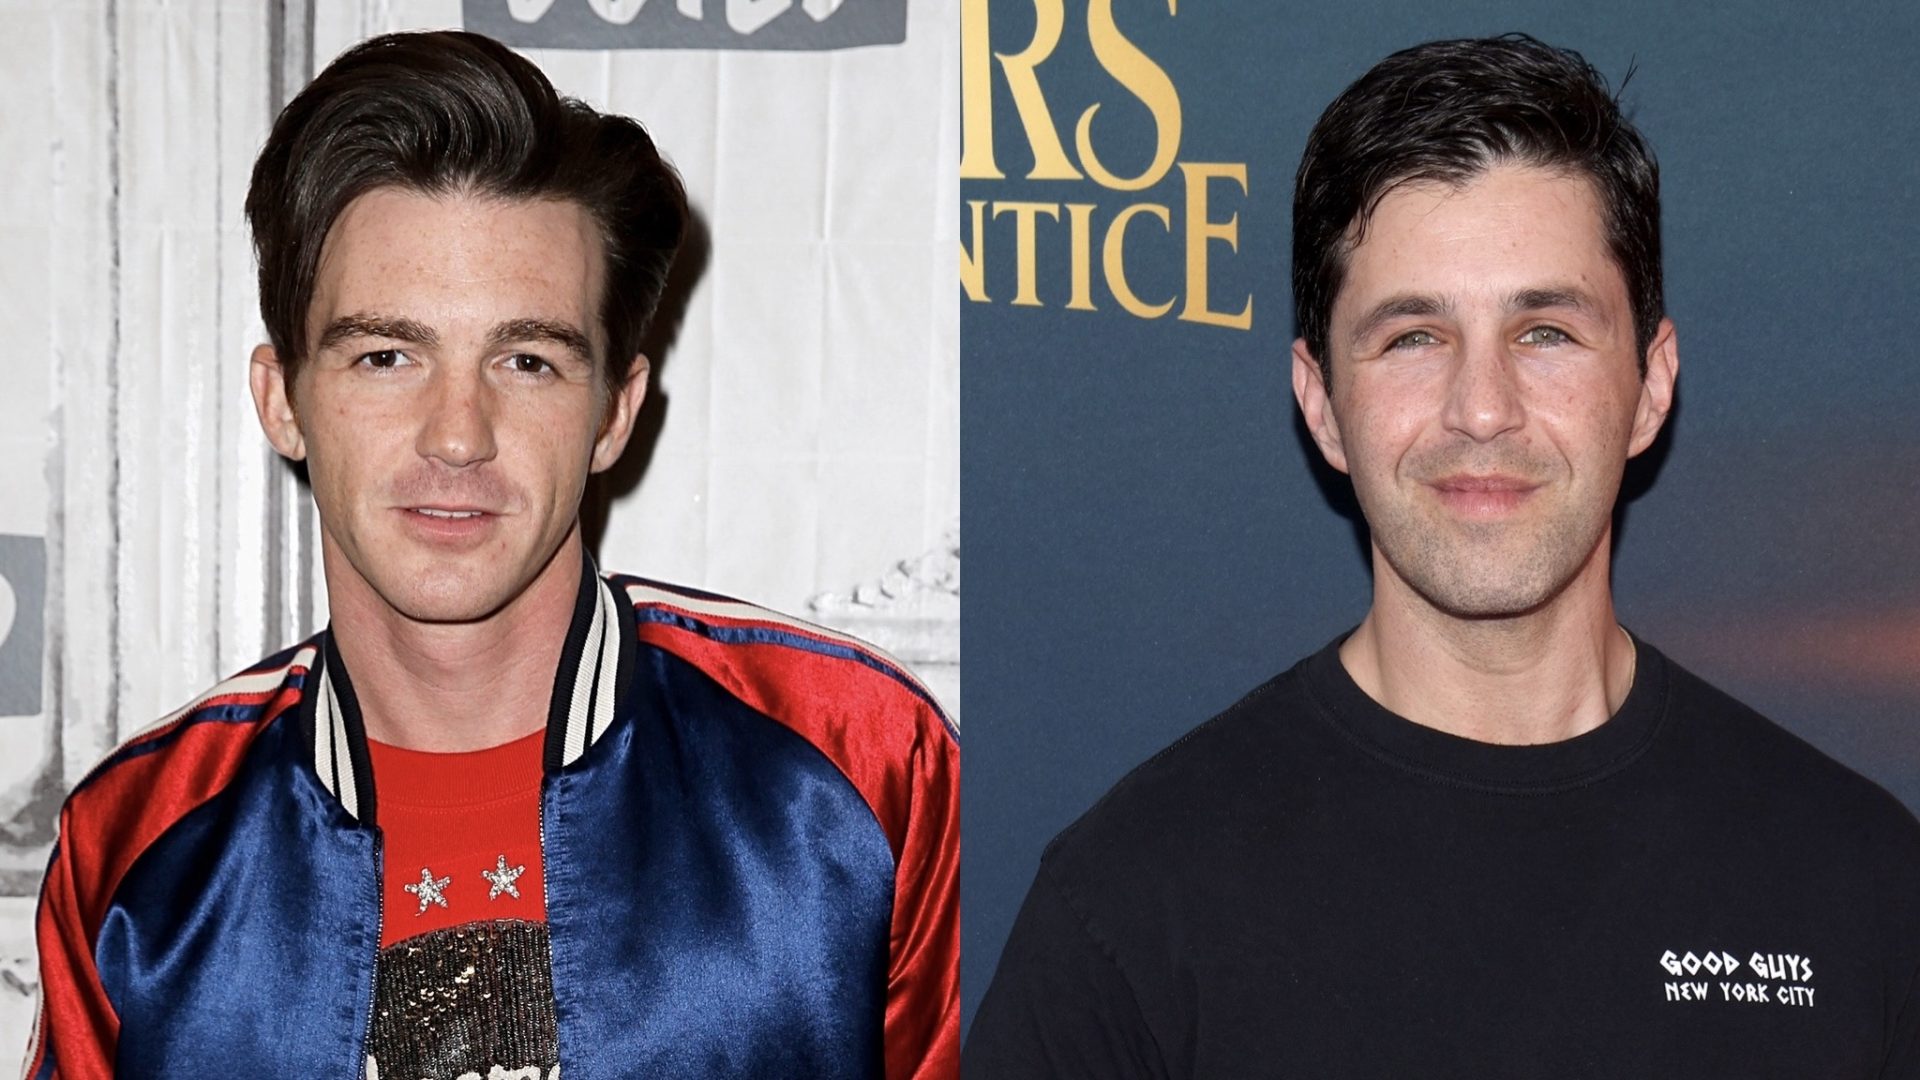 Drake Bell Speaks Out After Josh Peck Received Backlash For Publicly Remaining Silent After His Sexual Assault Revelation (WATCH) thumbnail